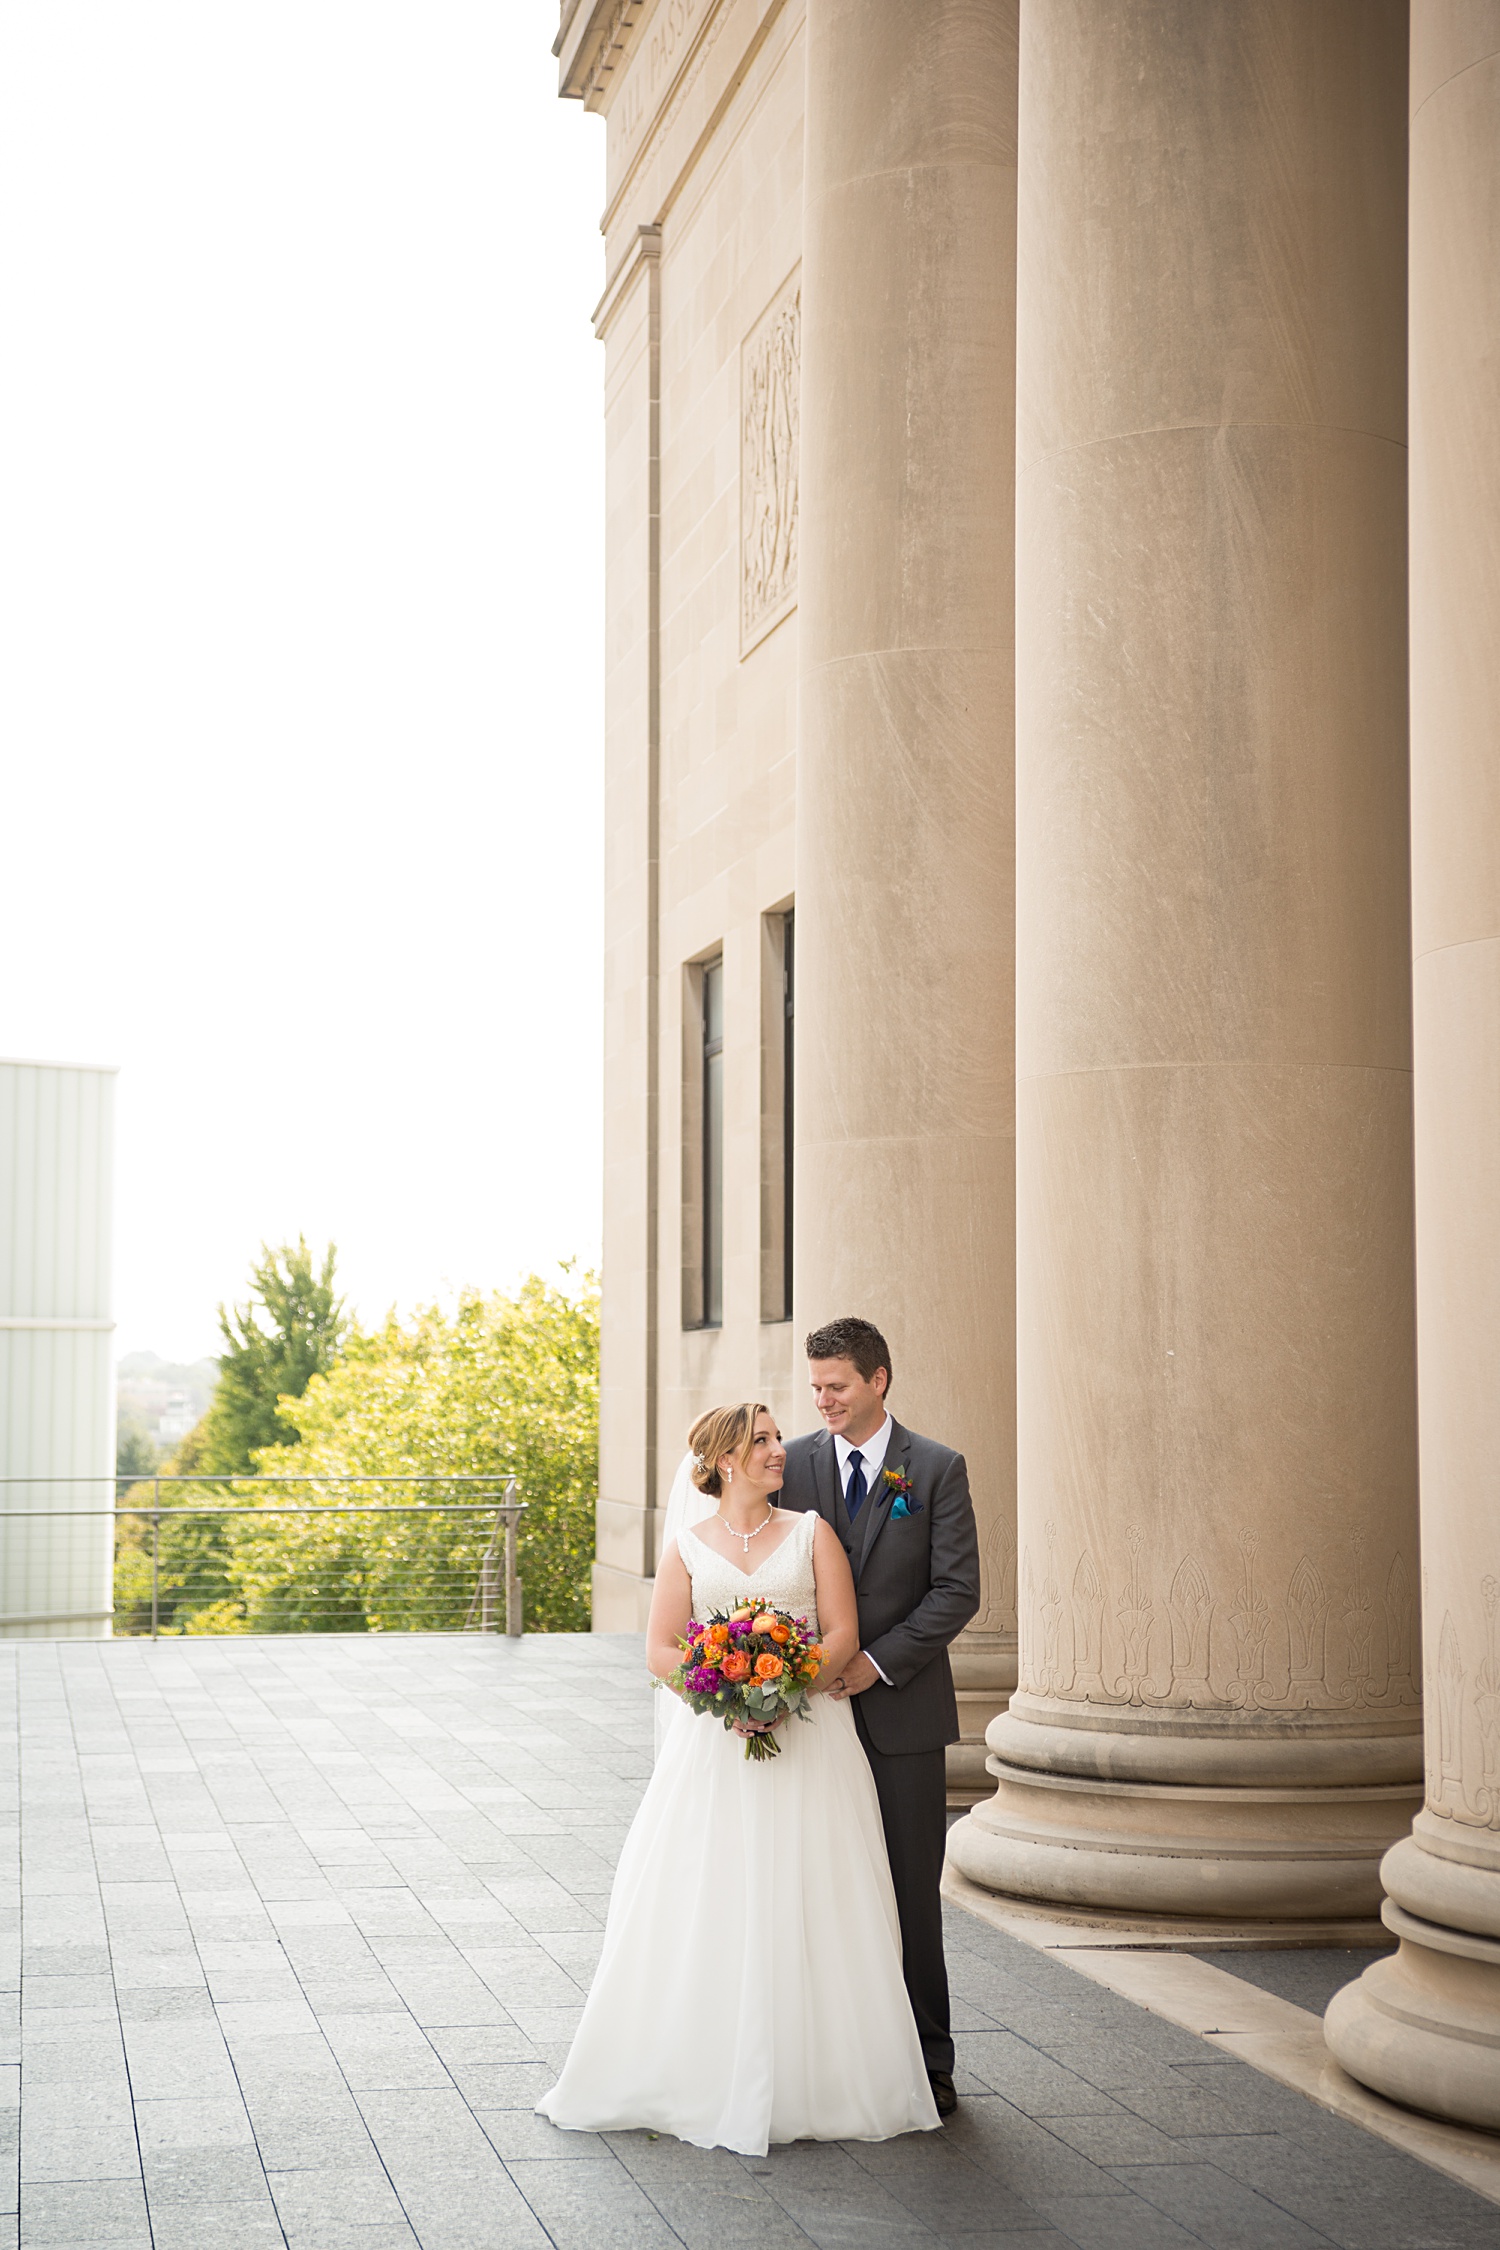 Wedding photos at the Nelson Atkins Museum of Art in Kansas City, MO Emily Lynn Photography